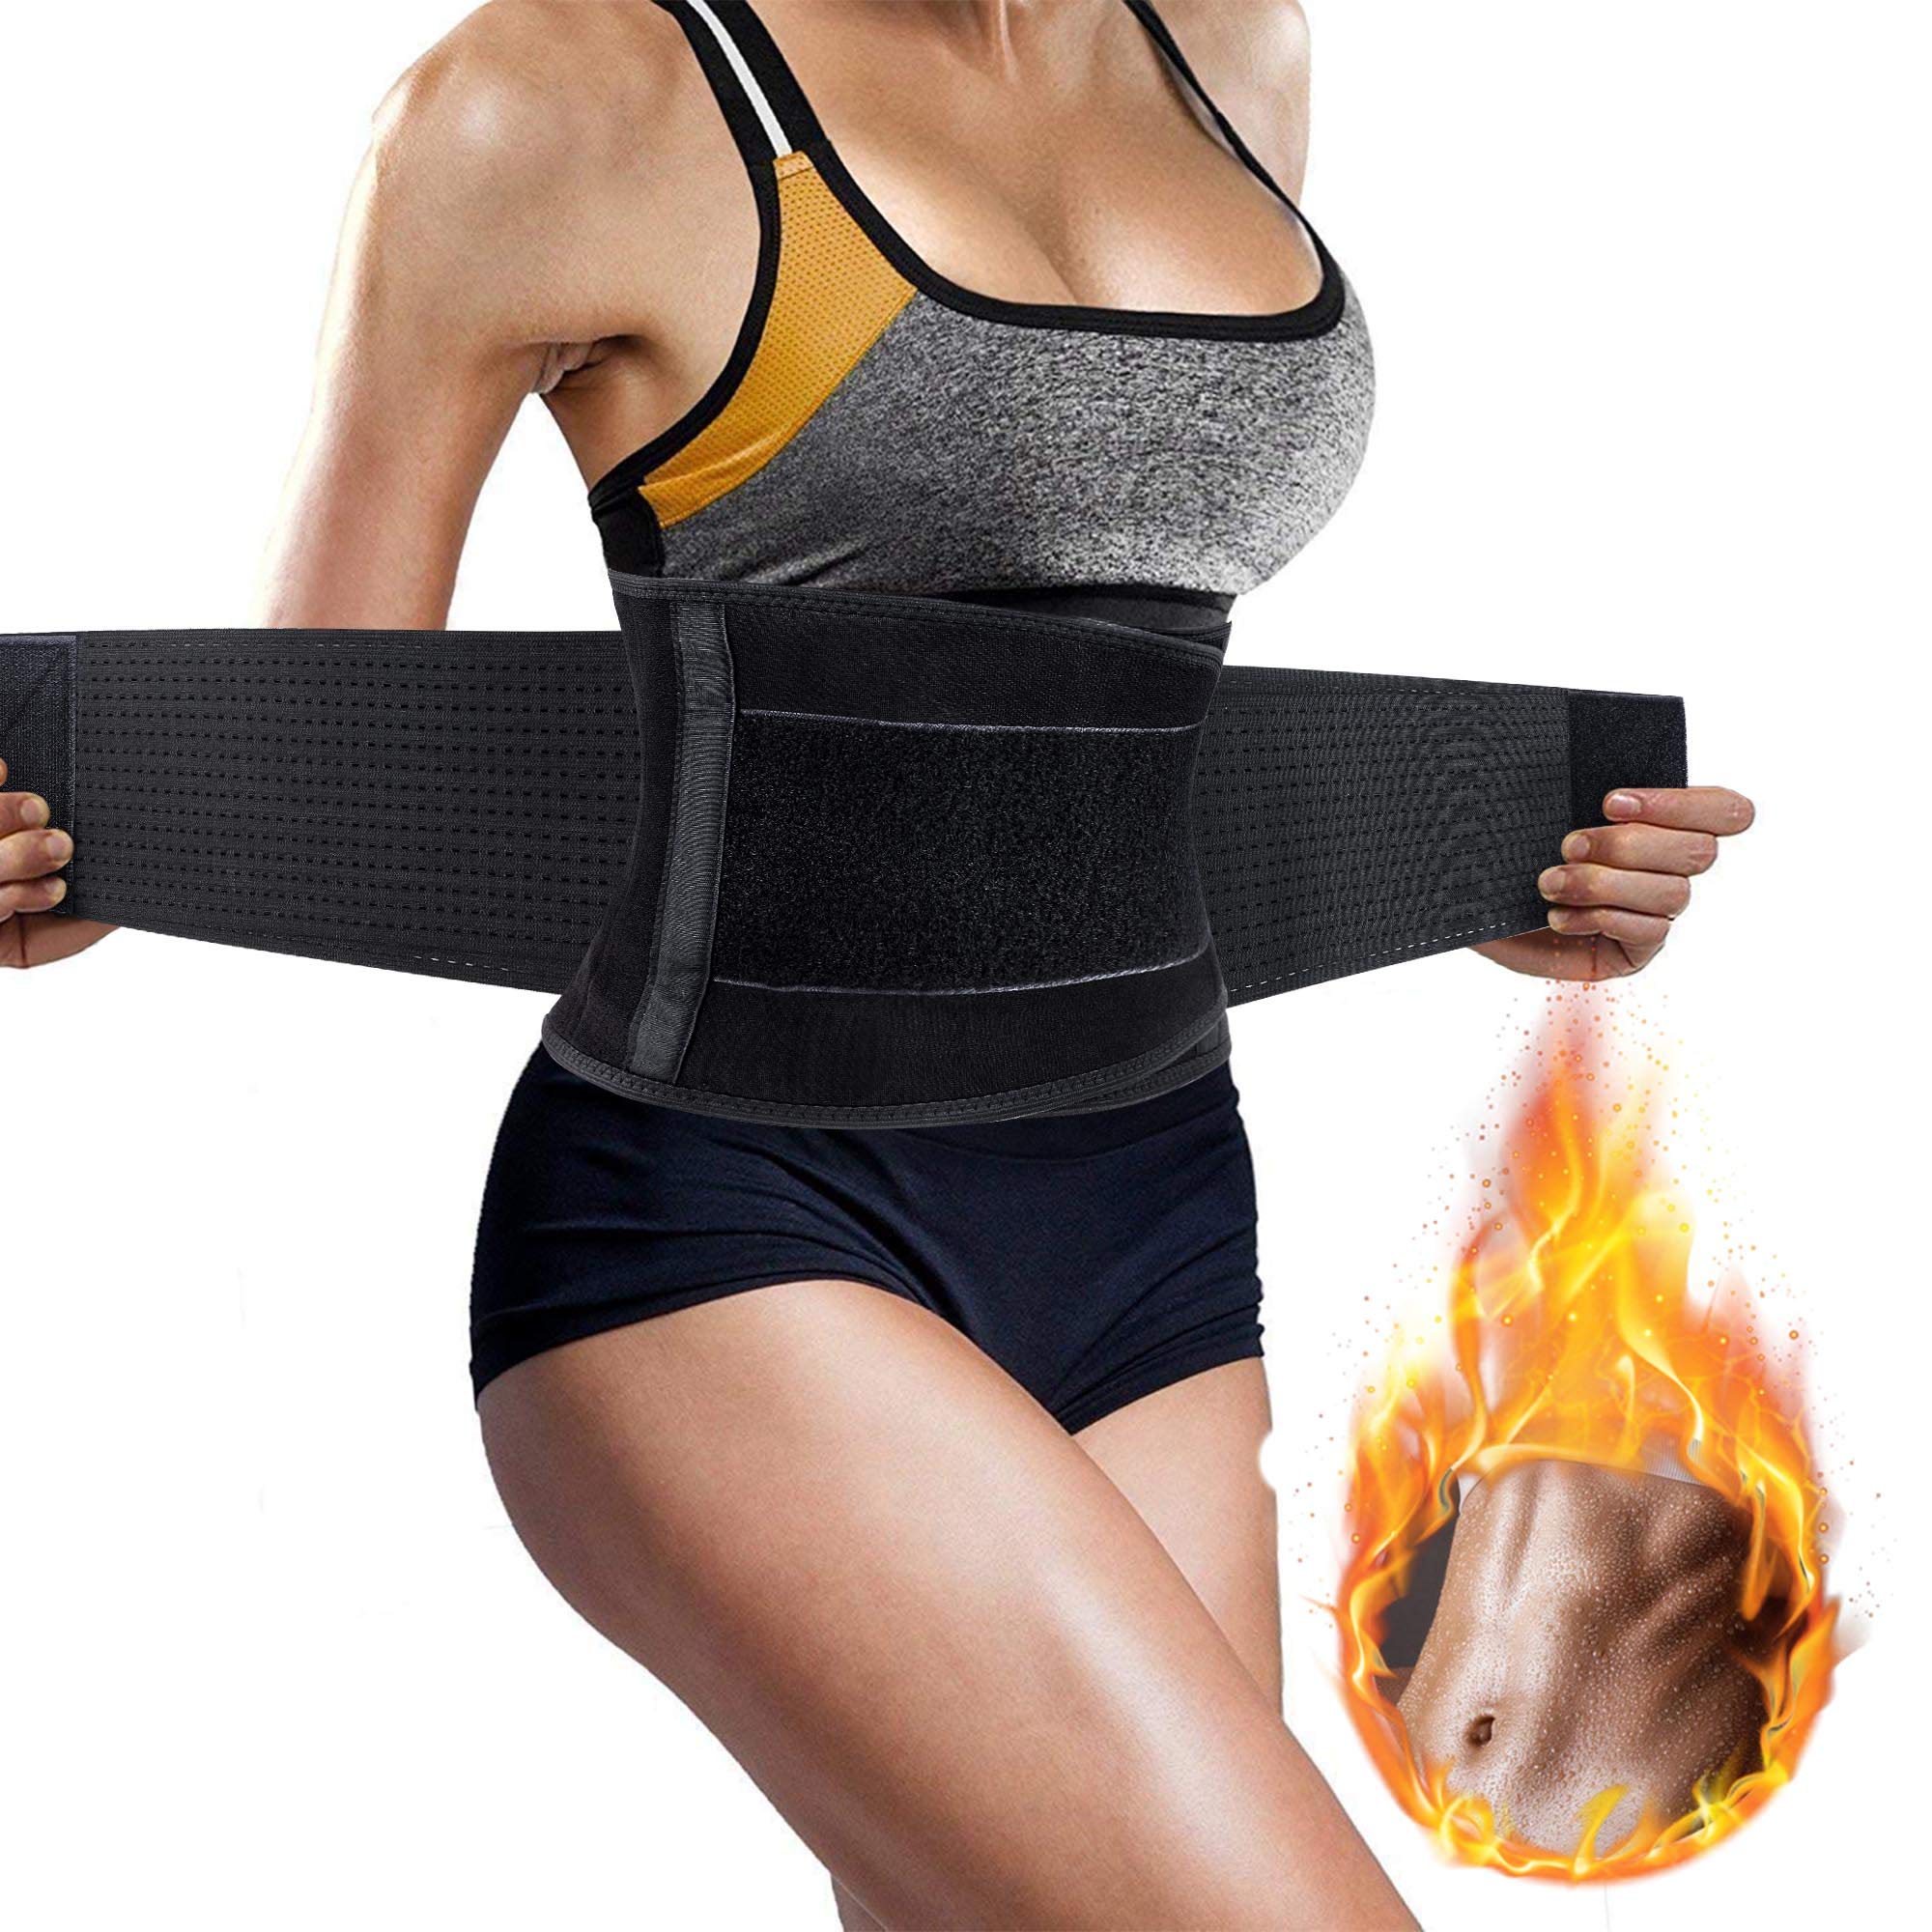 Lumbar Lower Back Brace Support Belt for Back Pain Relief